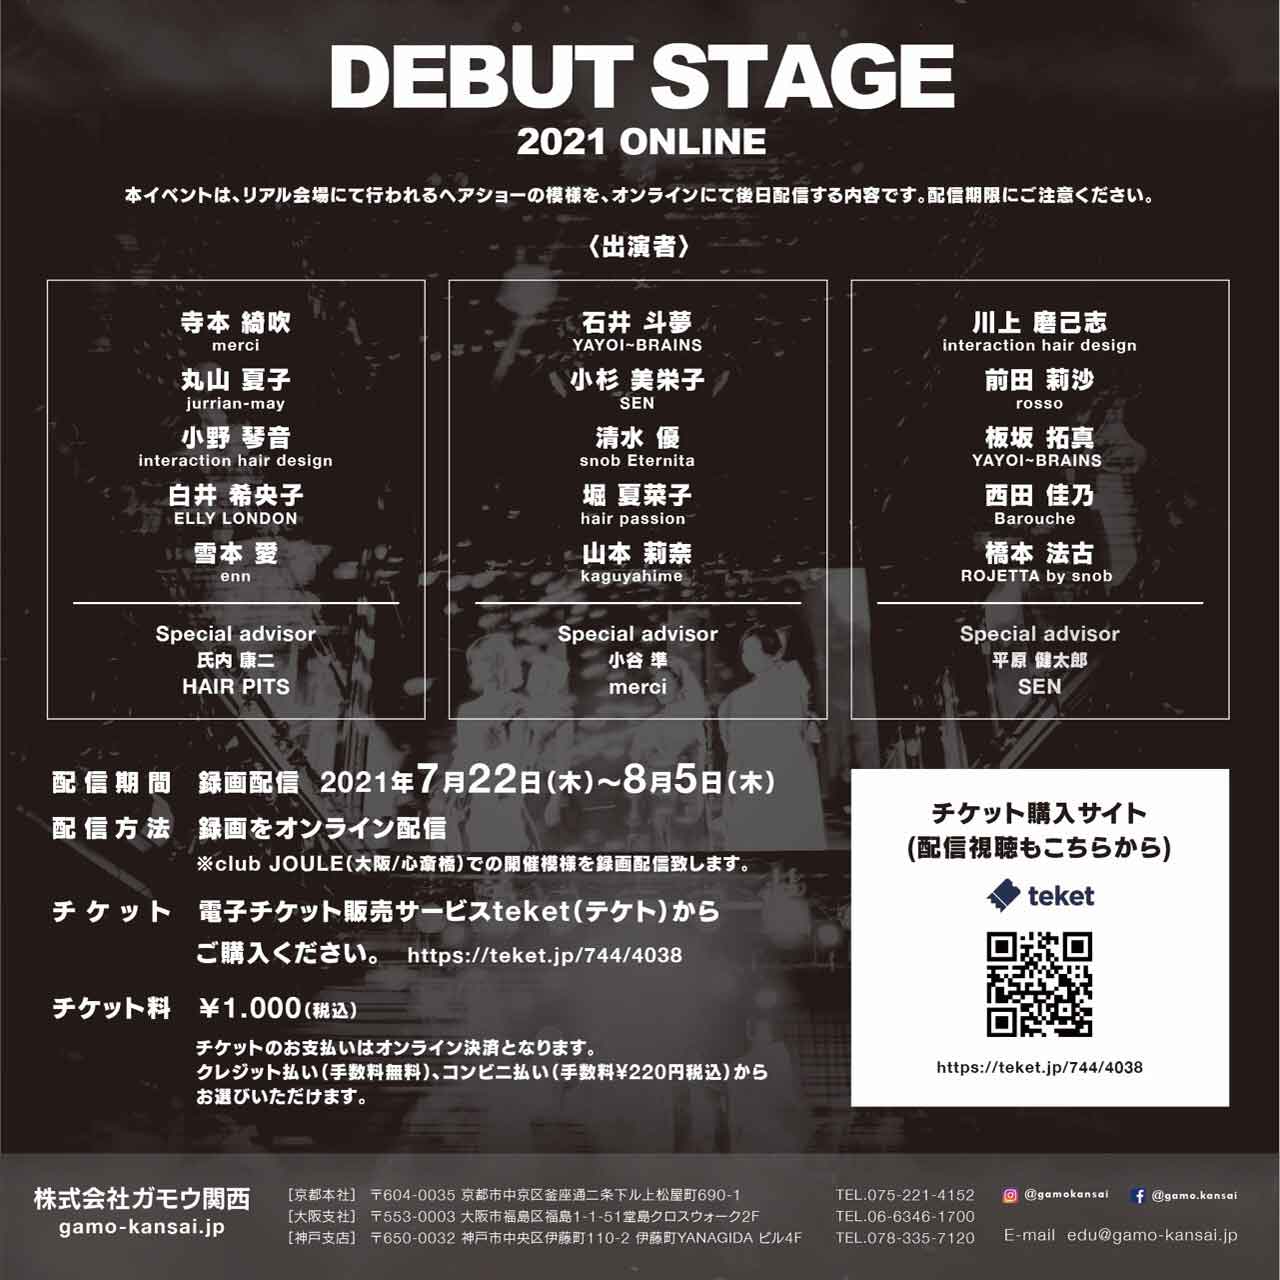 DEBUT STAGE 2021 ONLINE - 白井希央子（住吉TheEighth店）出演